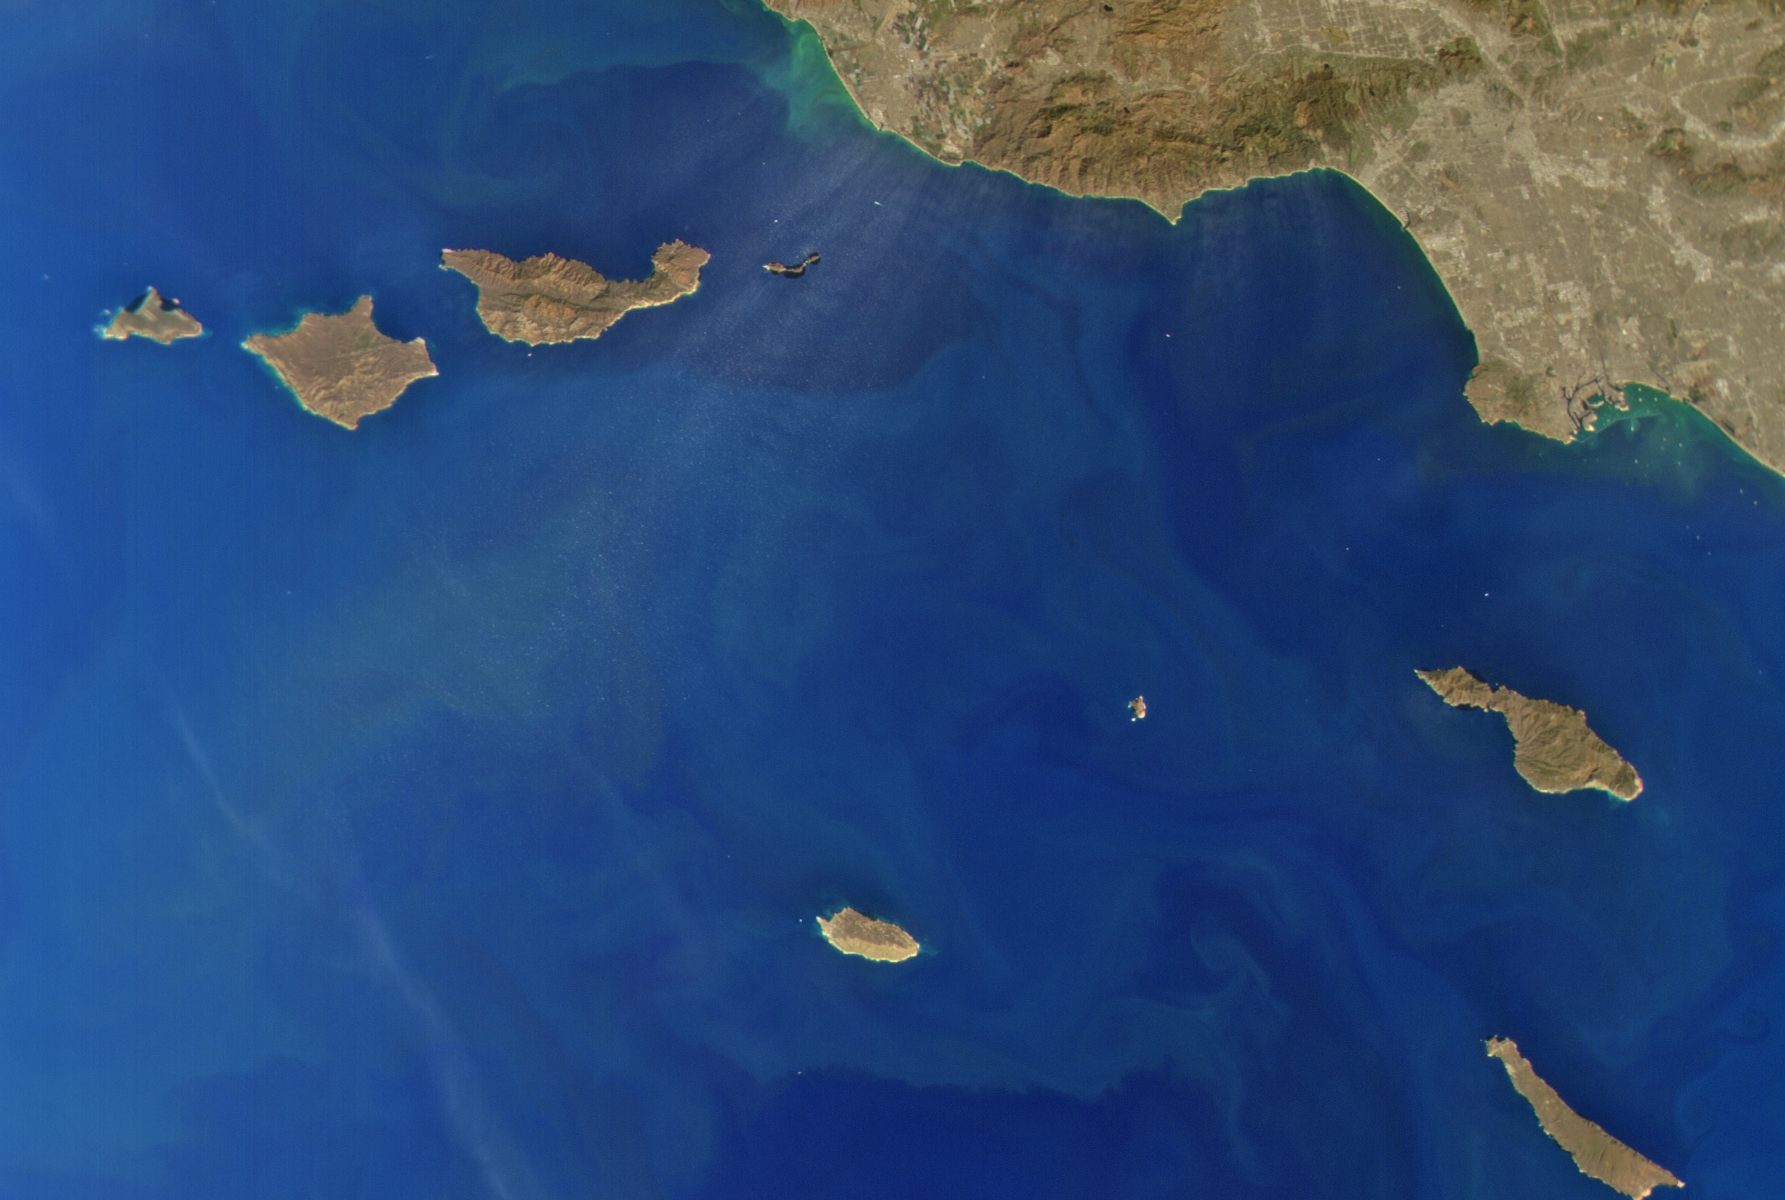 Image of the Channel Islands off the California Coast